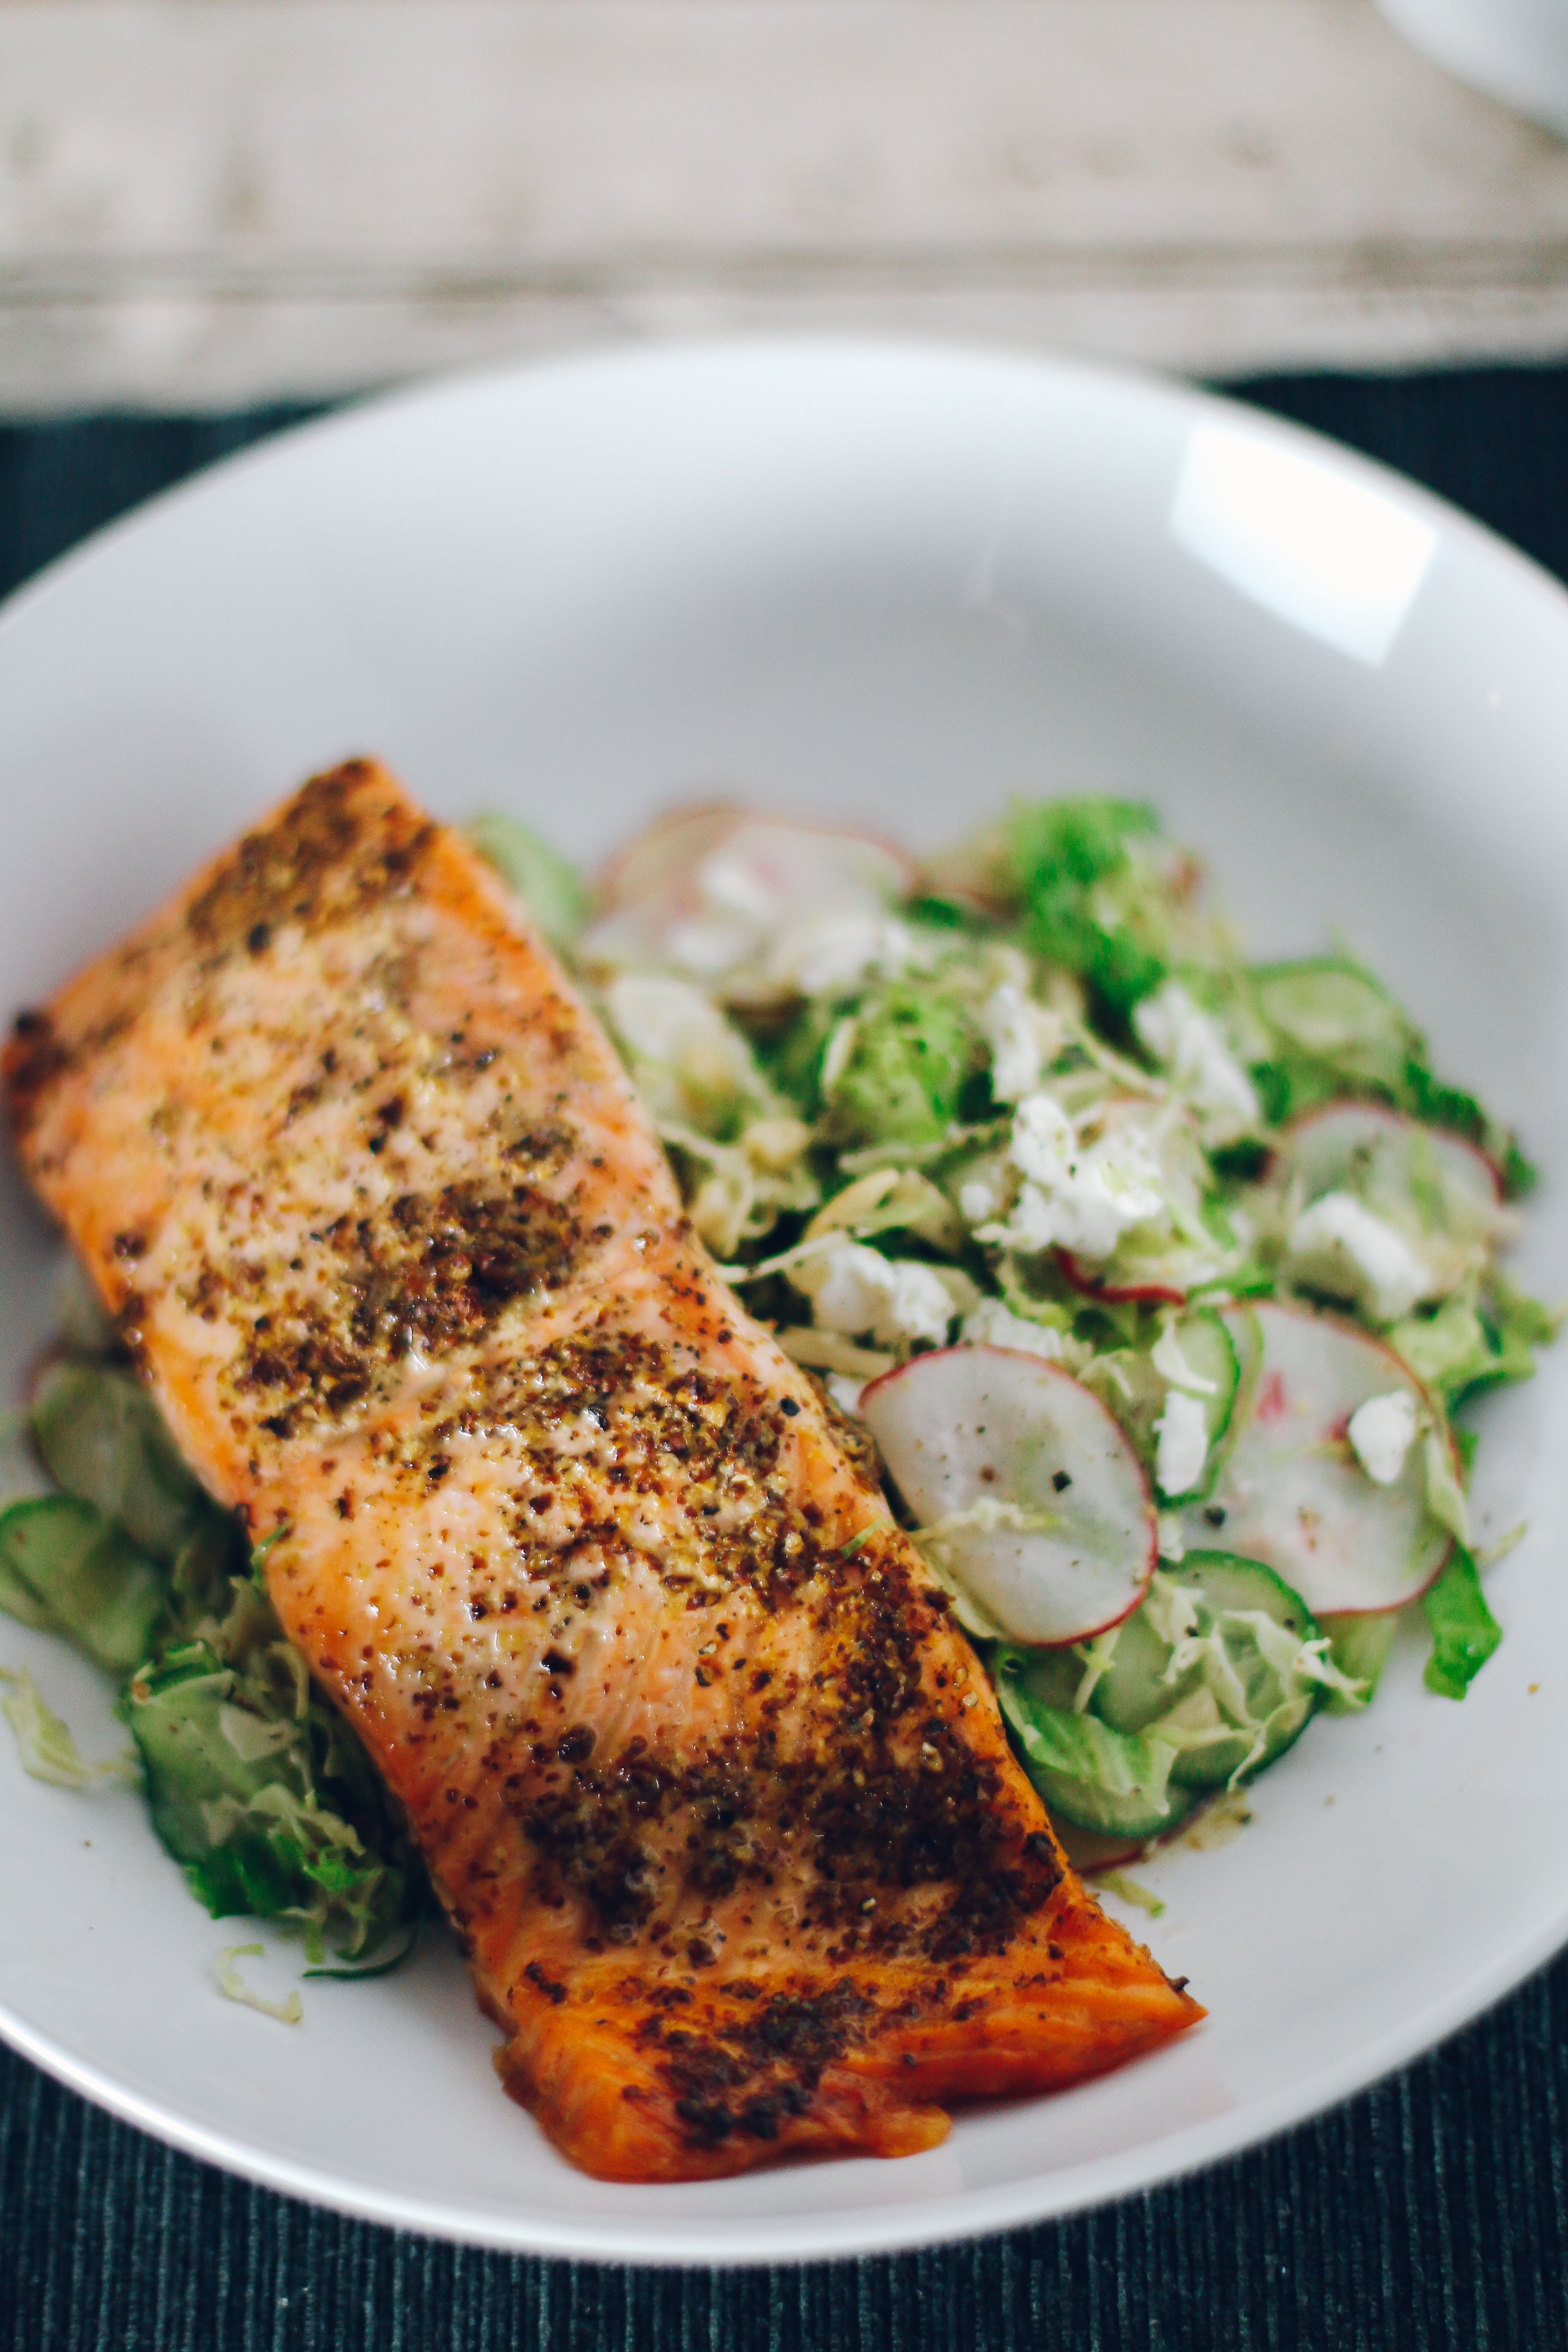 Mustard Salmon Chop Chop Salad with Goat Cheese & Almonds | I Will Not Eat Oysters